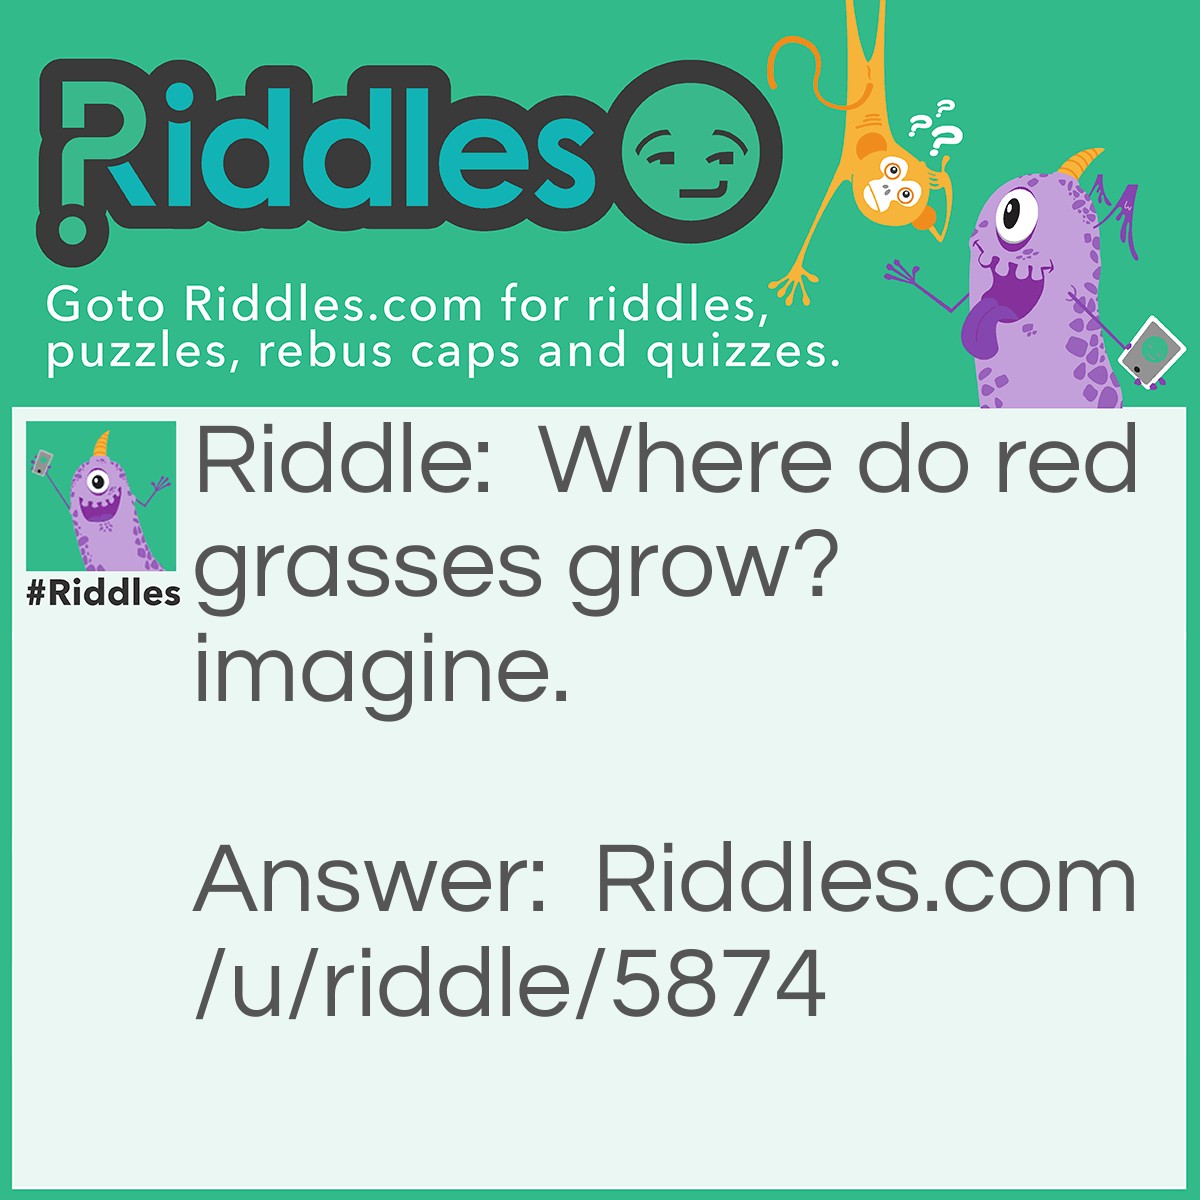 Riddle: Where do red grasses grow? imagine. Answer: In your imagination.